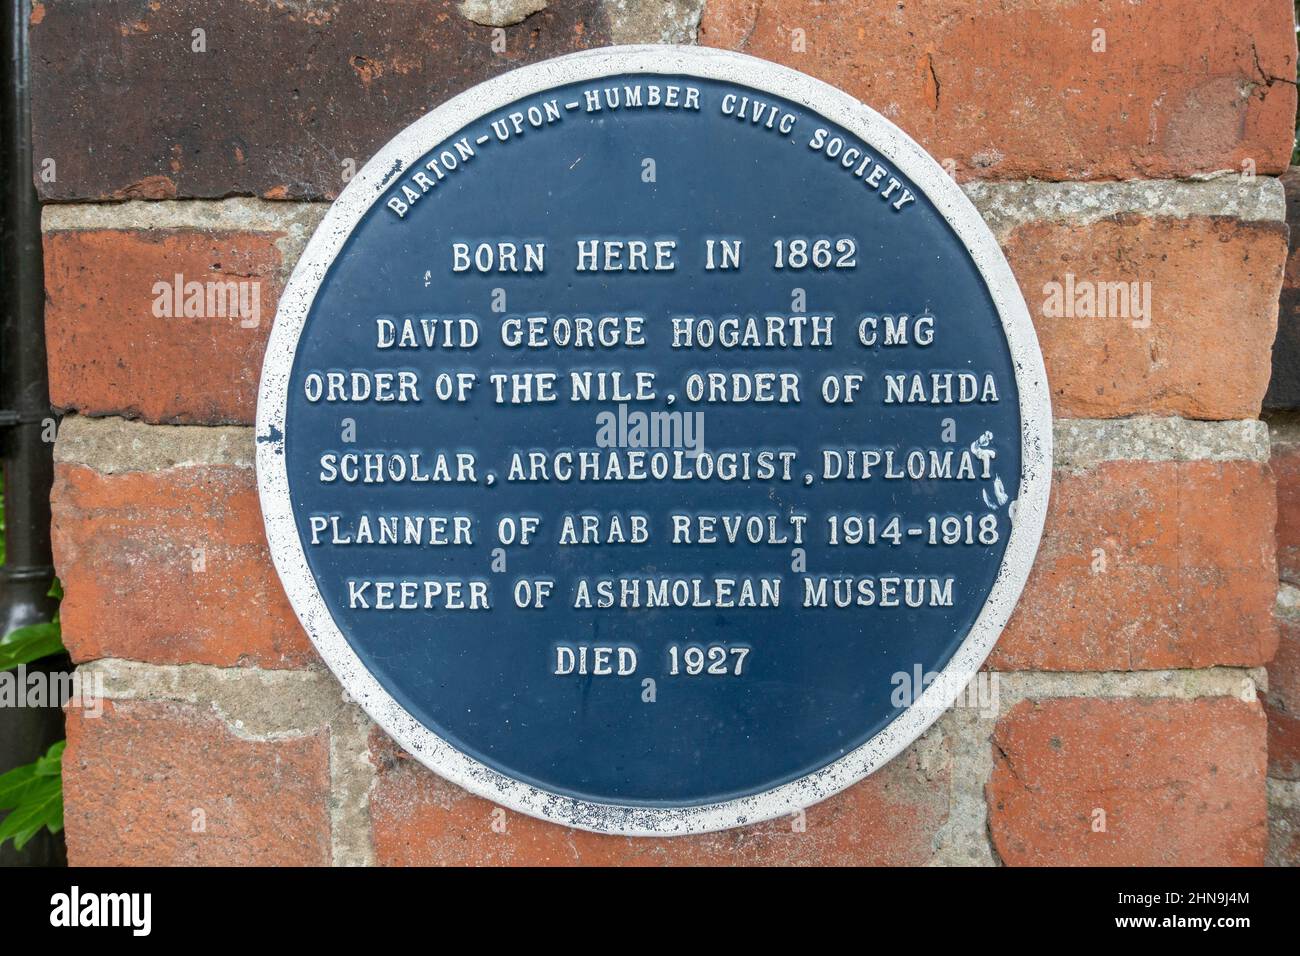 Blue plaque marking birthplace of David George Hogarth CMG, close to St Peter's Church, Barton-upon-Humber, North Lincolnshire, UK. Stock Photo